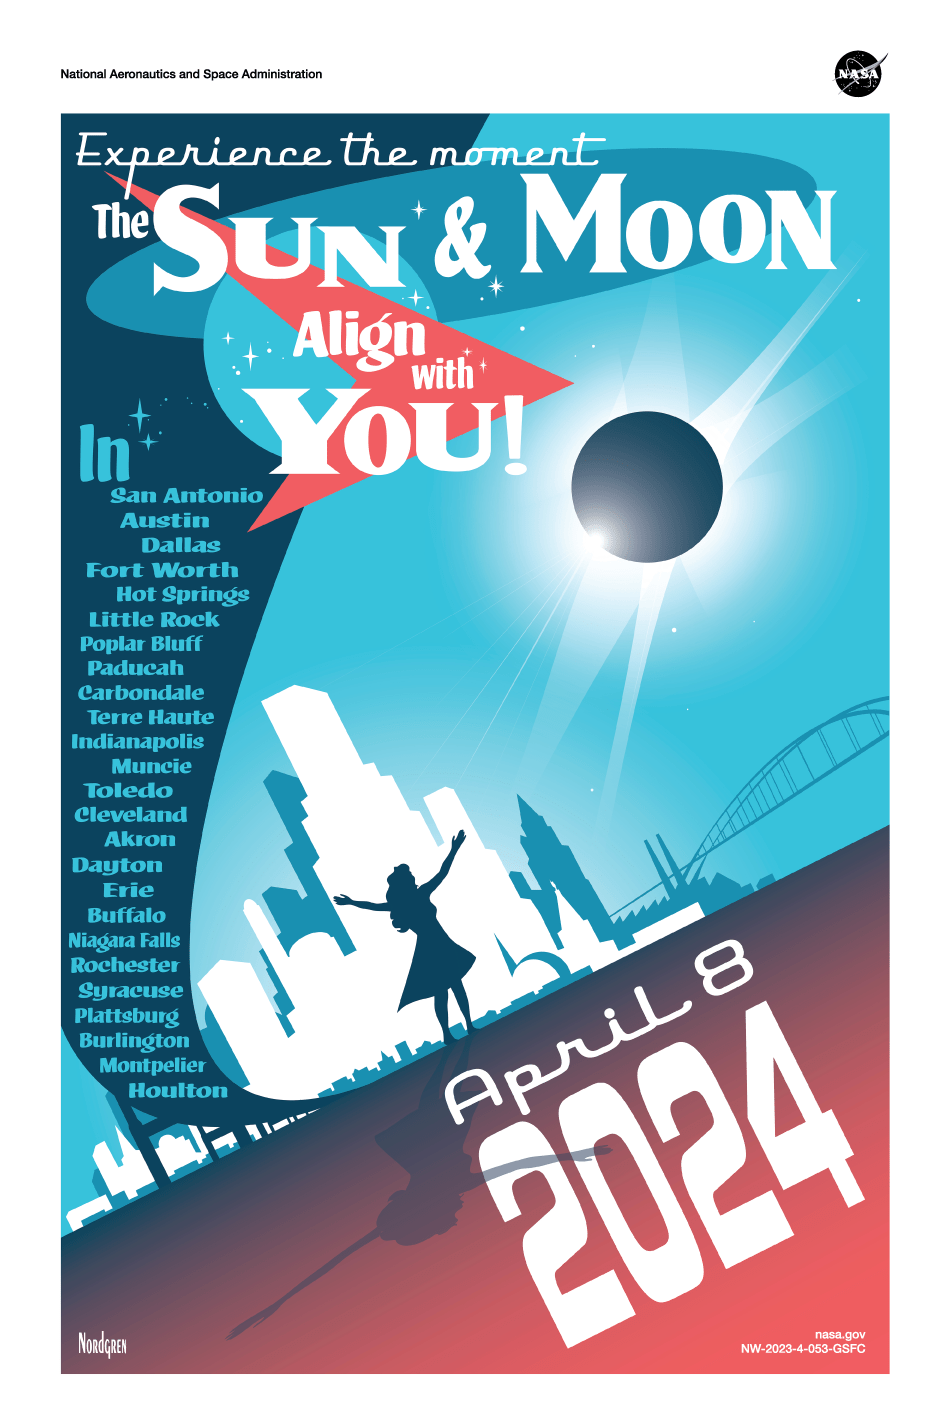 An illustrative poster shows the silhouette of a person with outstretched arms standing in front of a city skyline and looking up at a total solar eclipse in the sky. The top of the poster says “Experience the moment” and “The Sun & Moon Align with You!” The bottom of the poster has the date “April 8, 2024.” Along the left side, the word “In” appears above a list of 25 U.S. cities. The name “Nordgren” appears in the lower left corner.